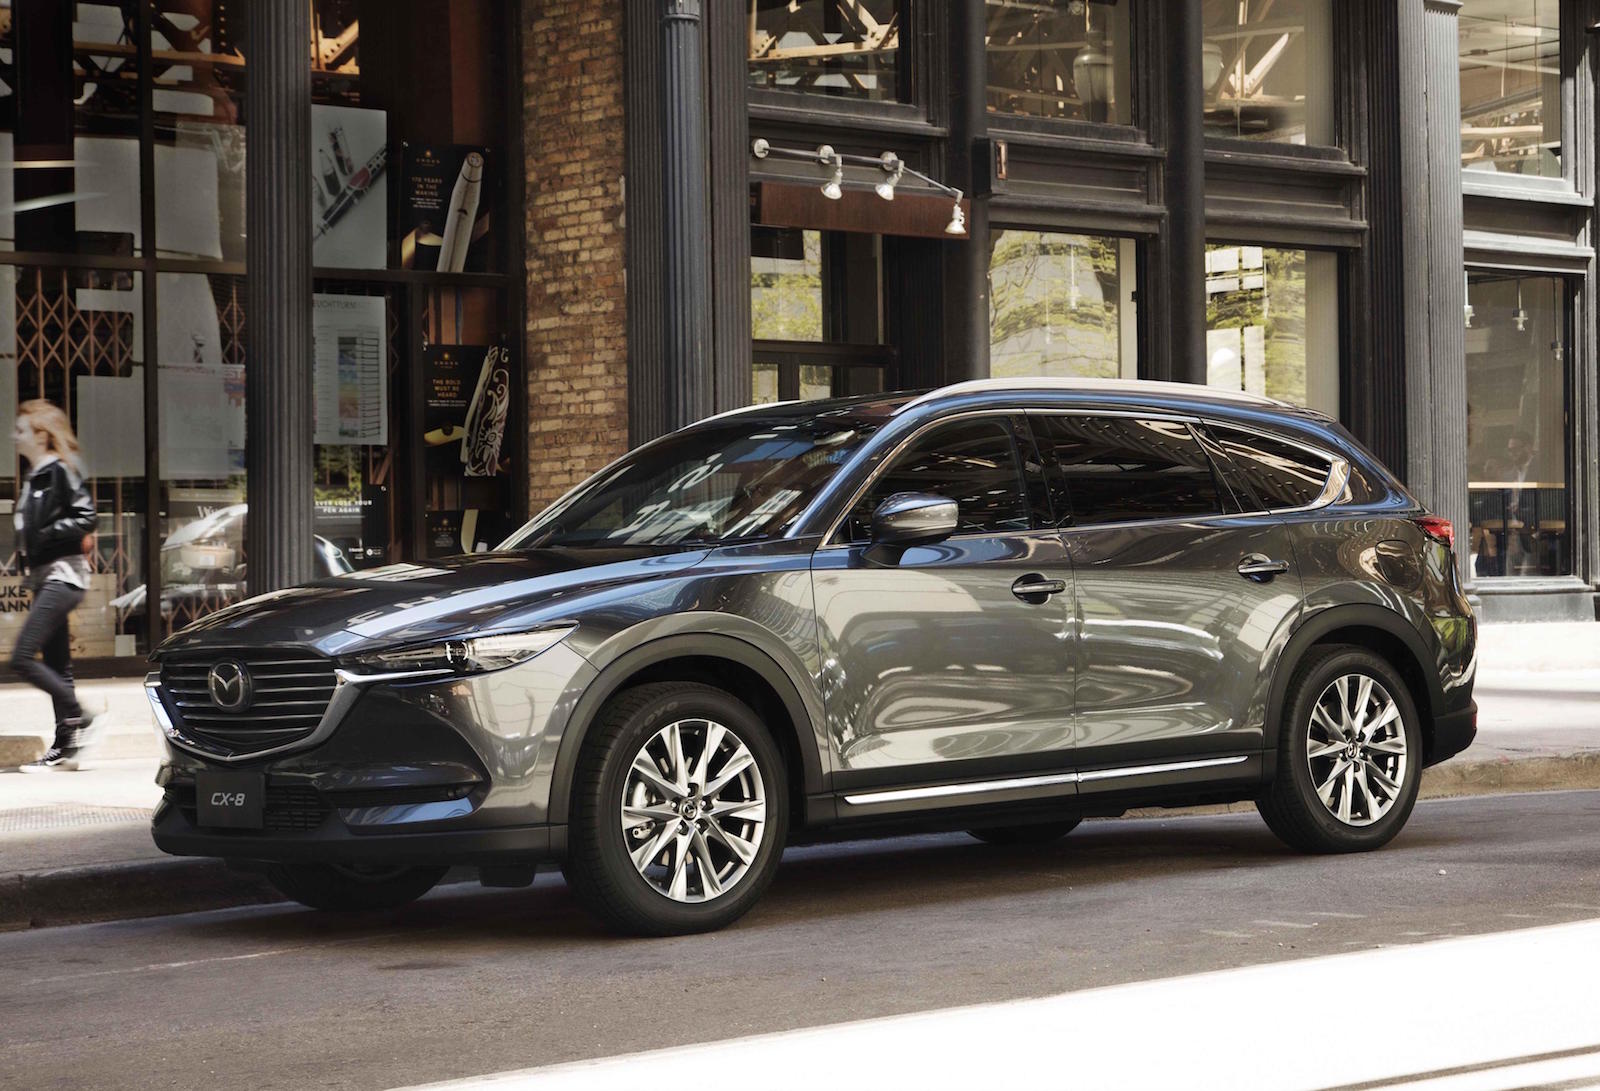 Mazda CX-8 confirmed for Australia, new diesel-only 7-seat SUV